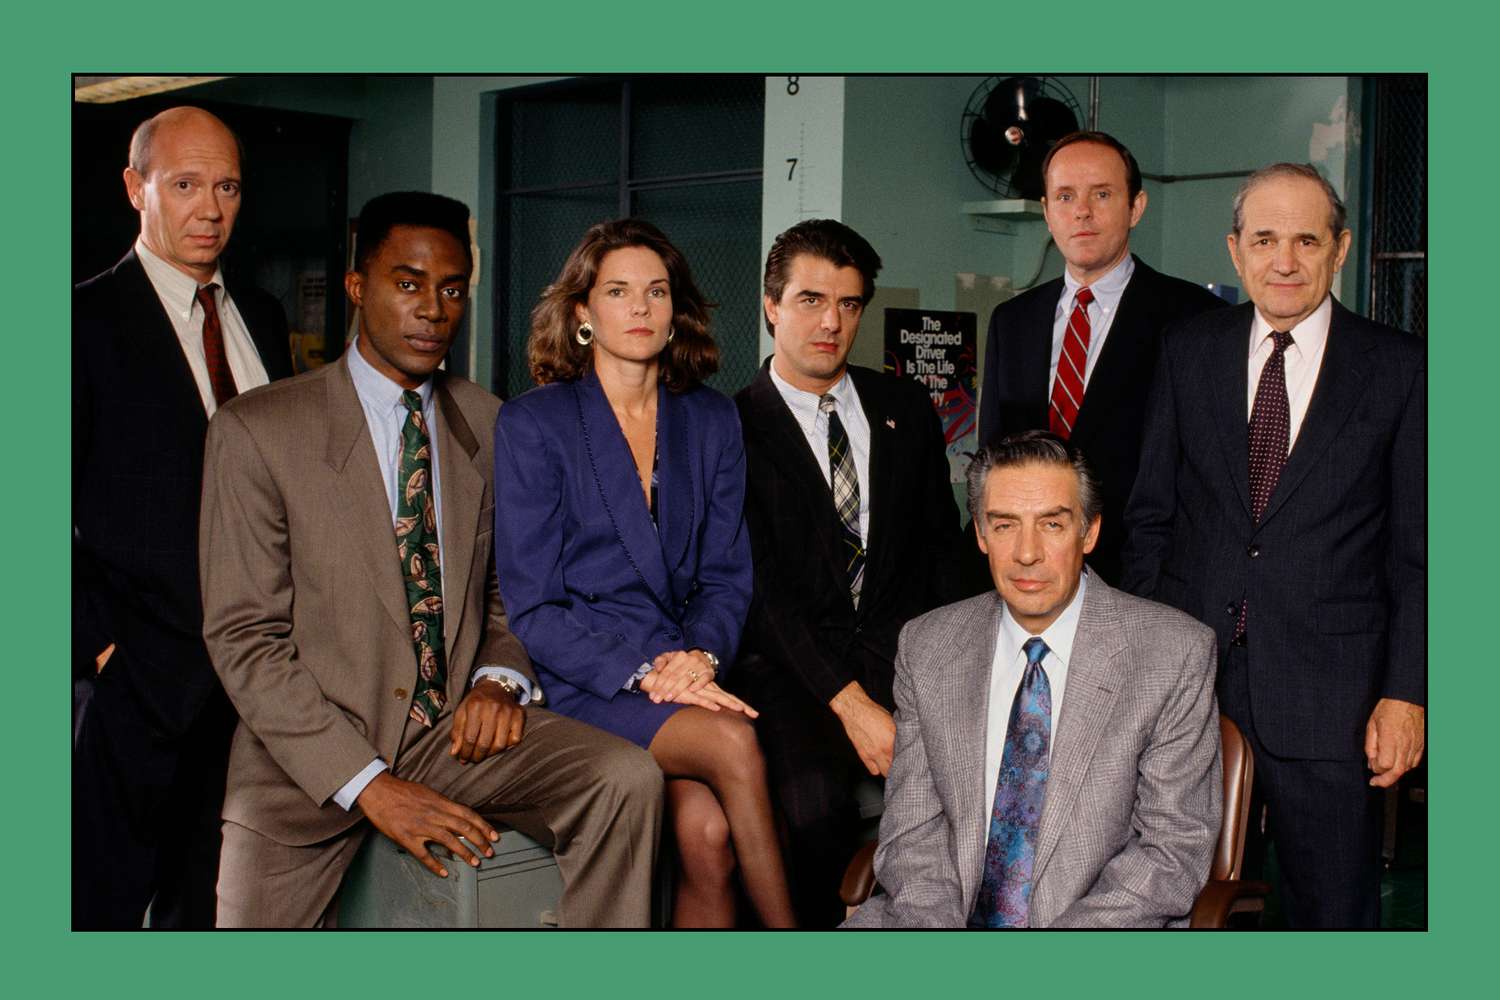 law and order cast